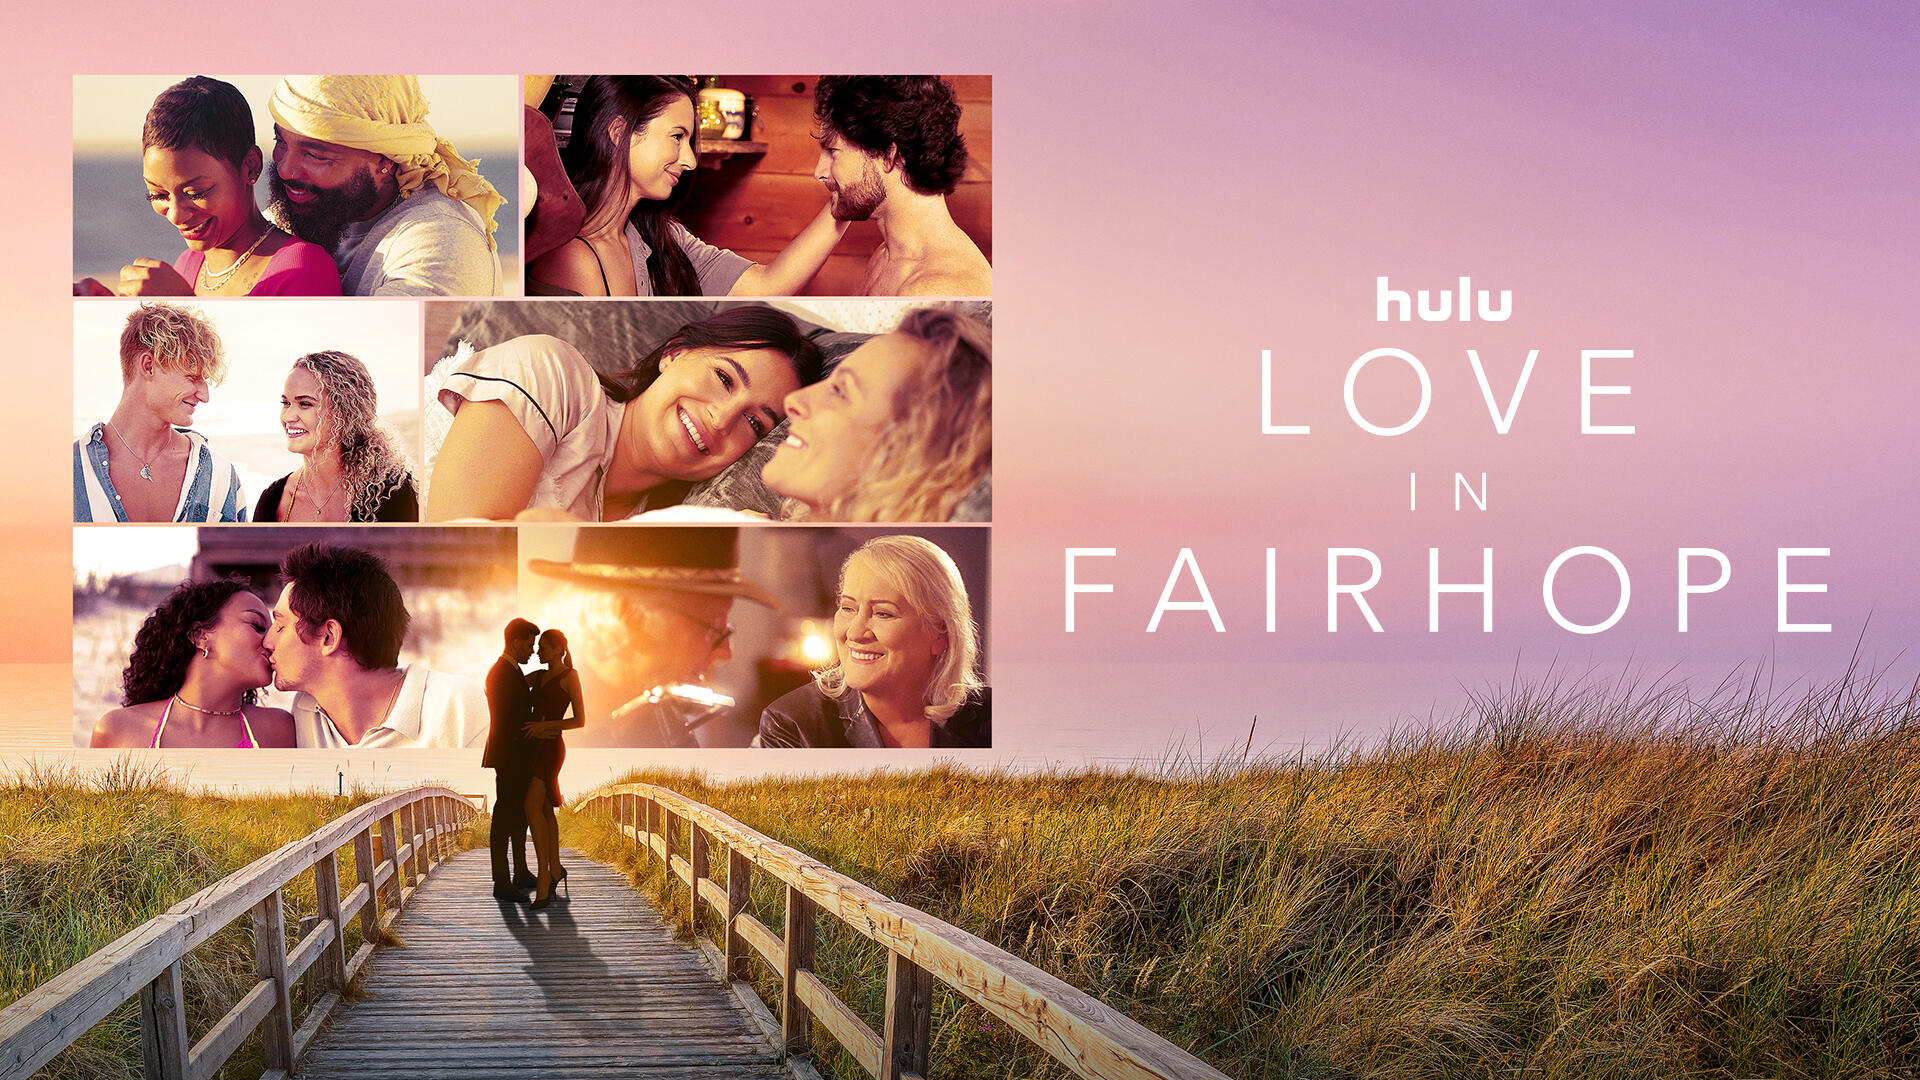 Love in Fairhope -- If you were given the chance to bring your fantasy love story to life on TV, how would it look? Would it be a picture-perfect fairy tale or something a bit messier? This uniquely unscripted romantic series follows five women at different stages in their lives as they experience reimagined romance in the picturesque small town of Fairhope, Alabama, a tight-knit community where everyone knows everyone else’s business and matters of the heart matter most. In “Love in Fairhope,” real people star in a story inspired by their own where fantasy and reality collide. (Courtesy of Hulu)